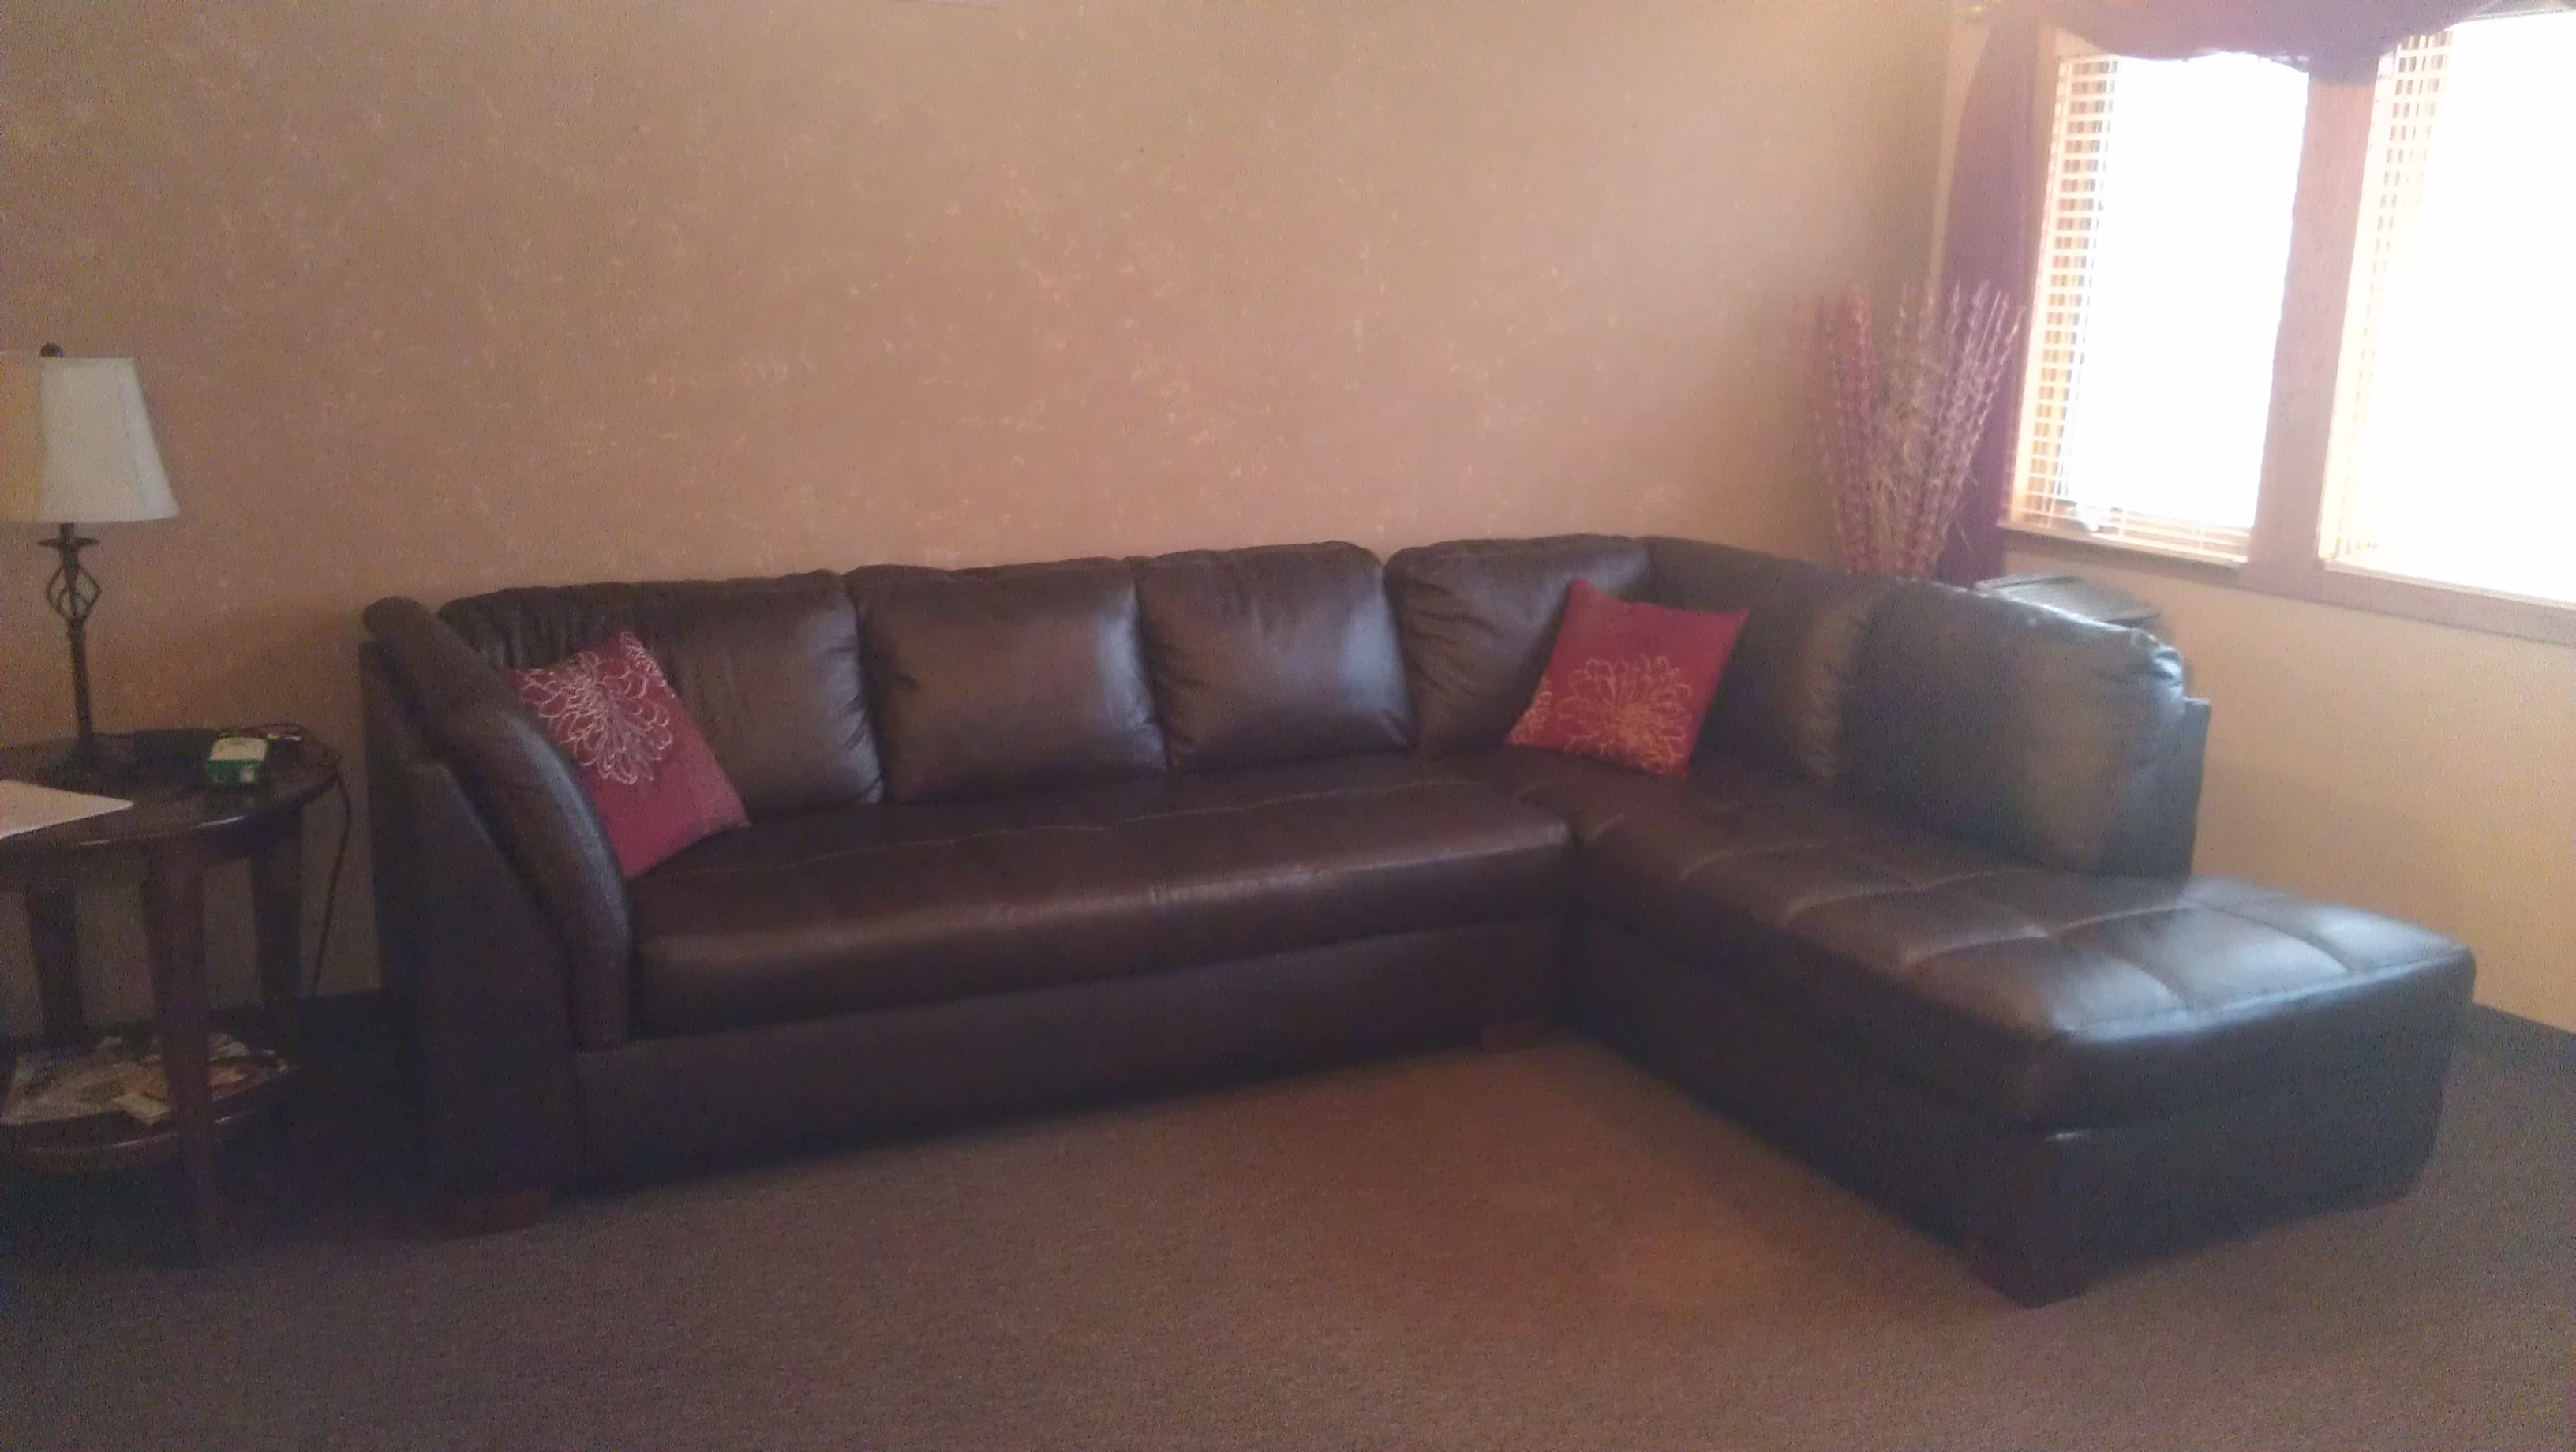 Newport House Purchased New Couch The Phoenix Residence